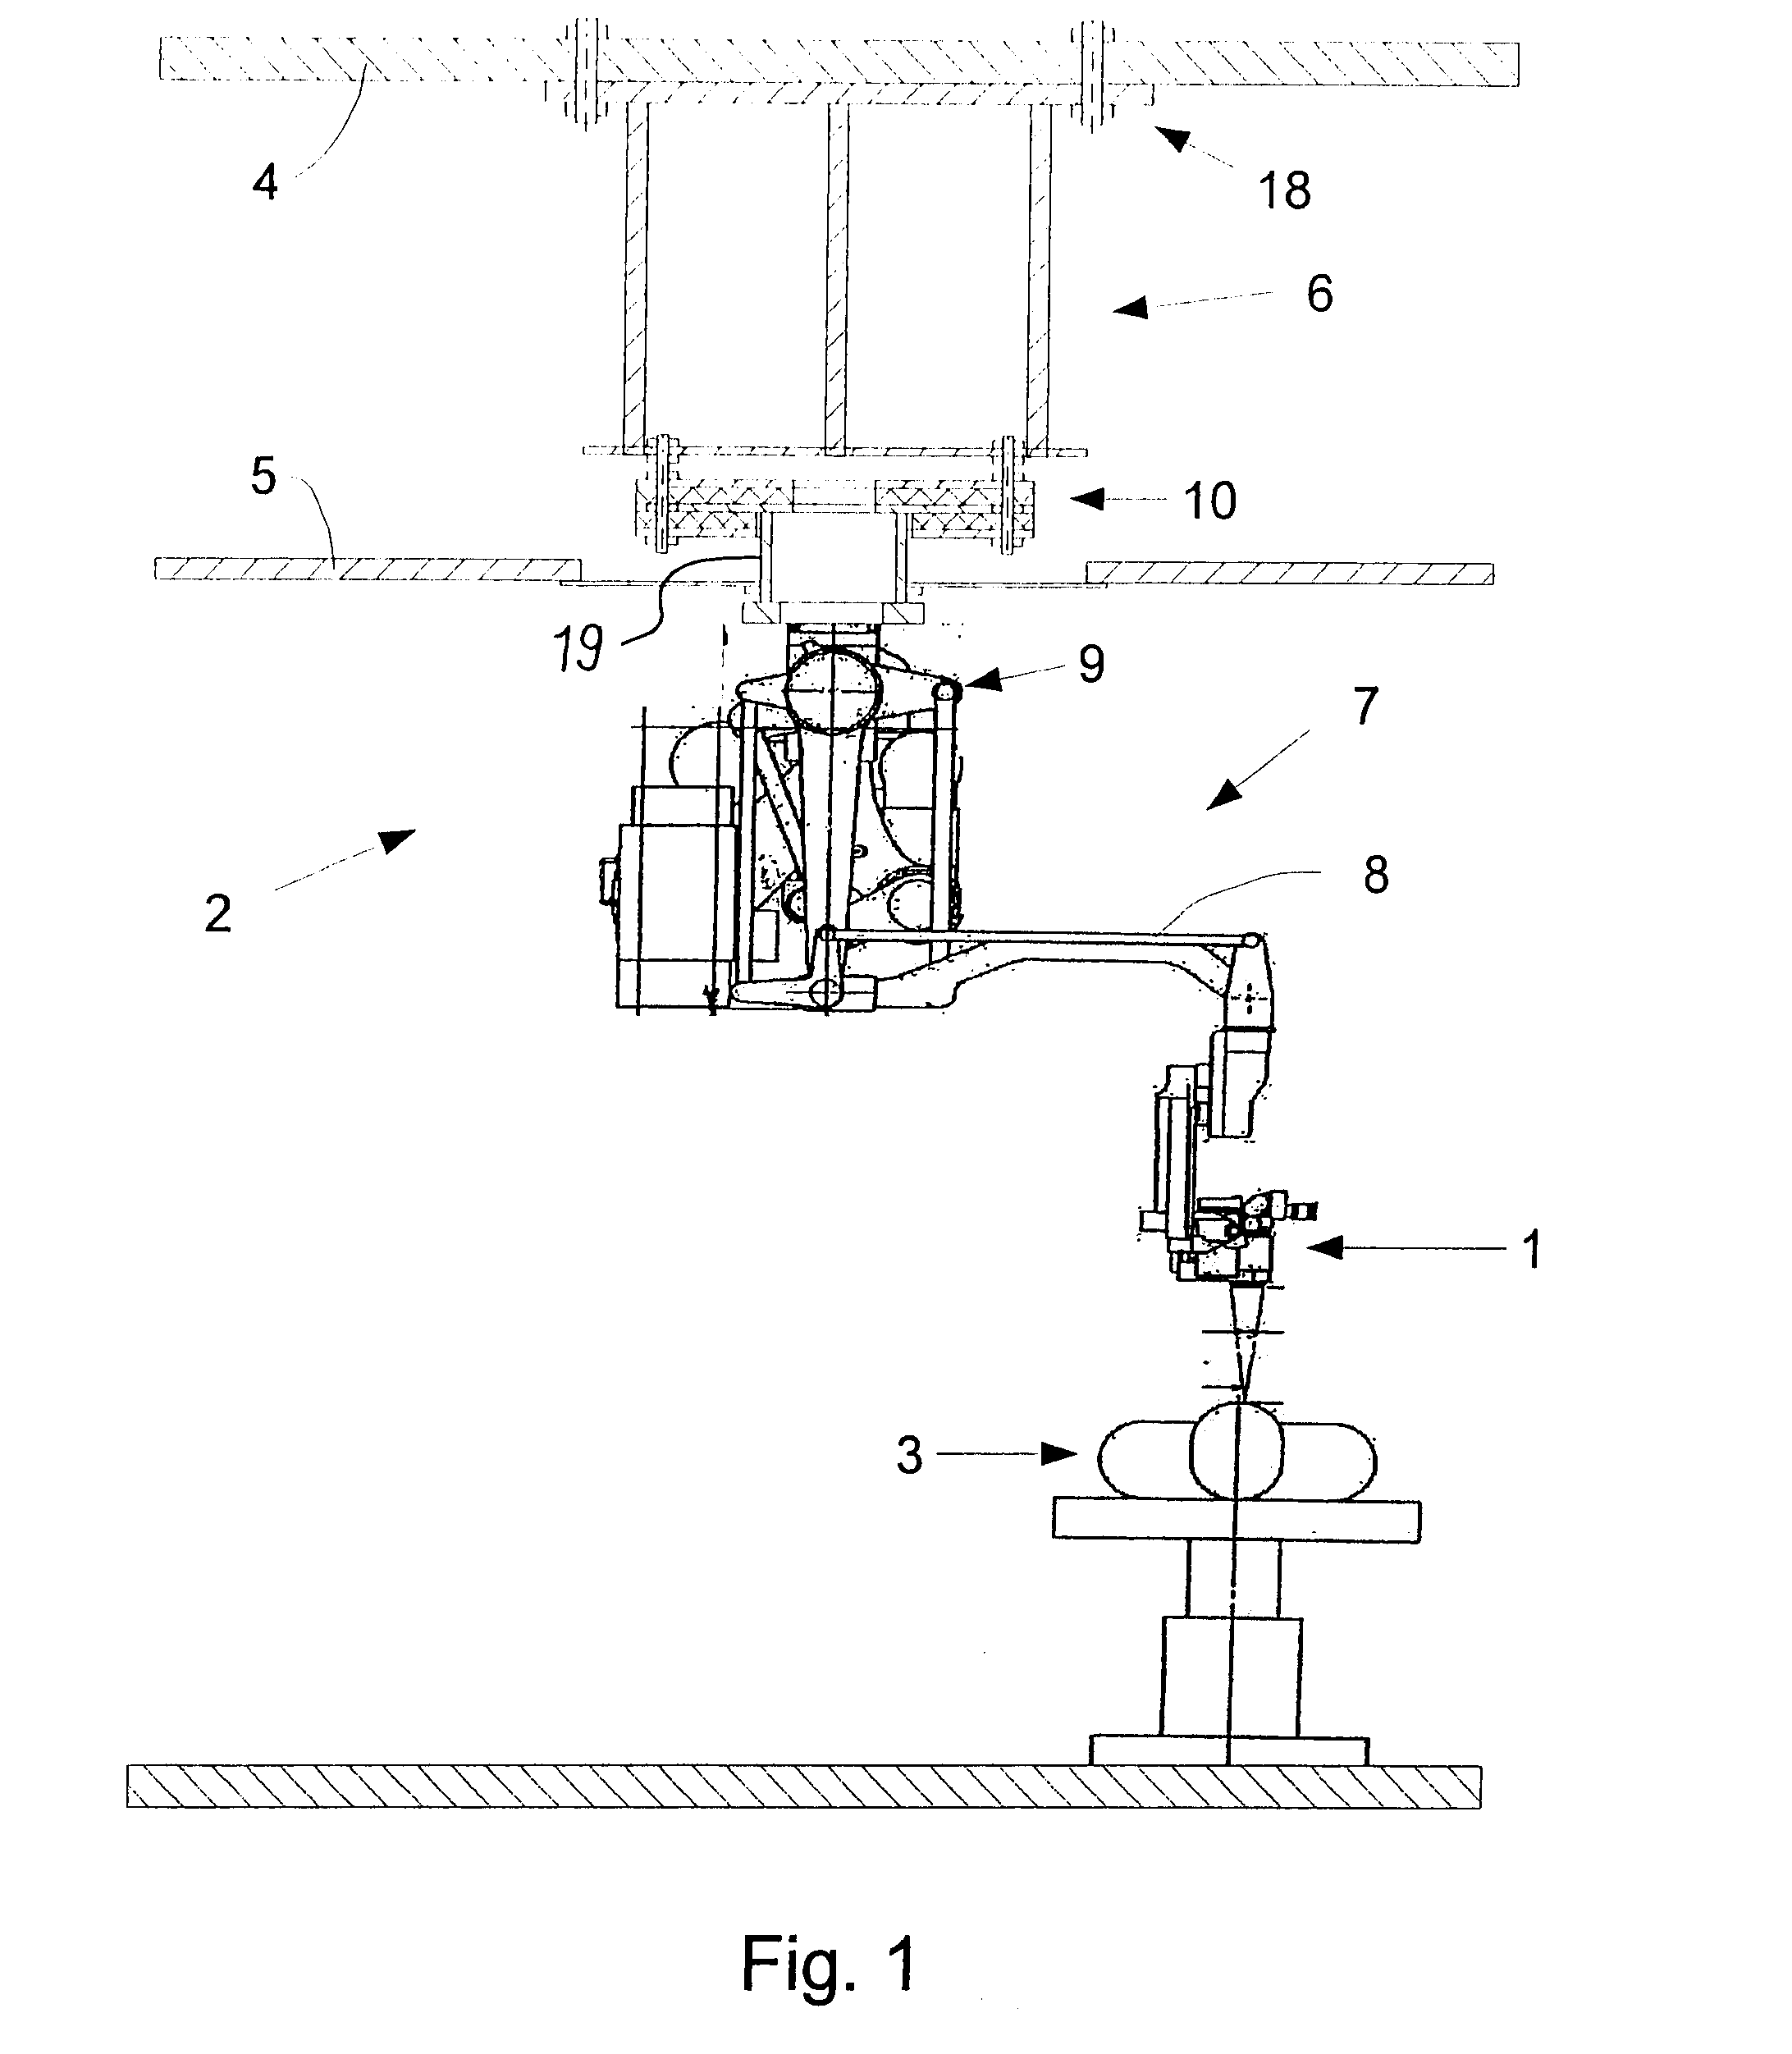 Vibration damping of a ceiling mount carrying a surgical microscope